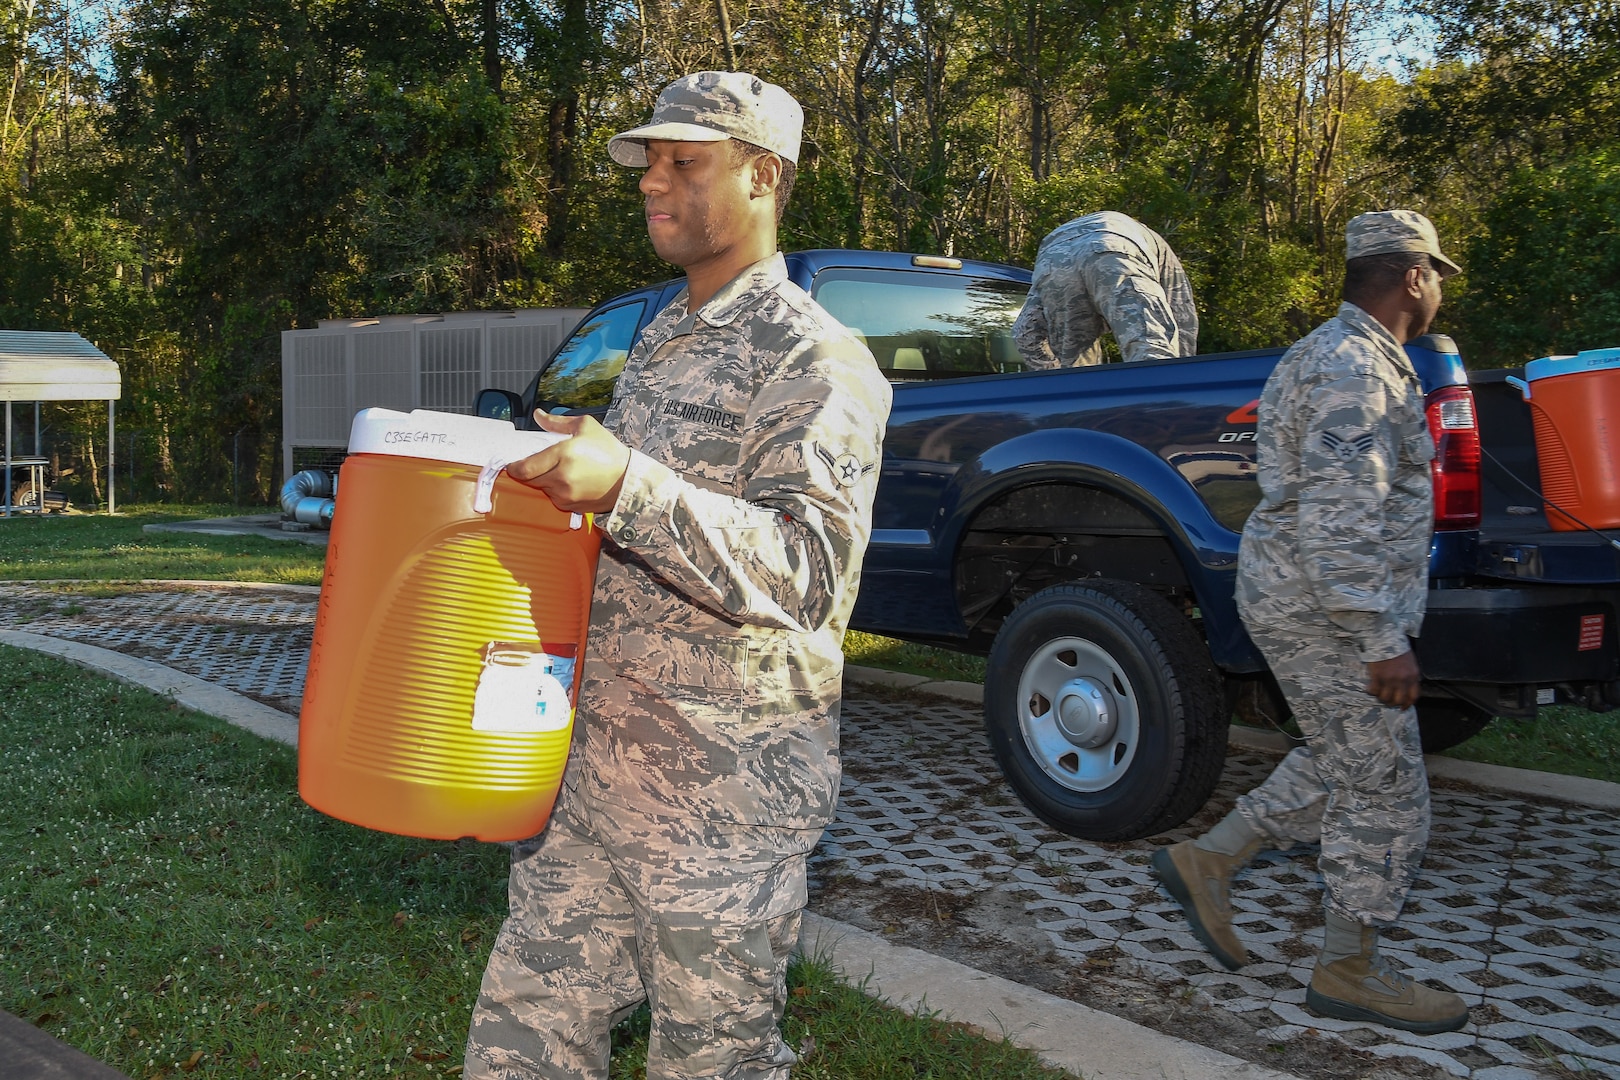 U.S. Airmen with the 116th Air Control Wing (ACW), Georgia Air National Guard, load supplies while preparing to leave Robins Air Force Base, Georgia for Seminole County, Georgia to assist with Hurricane Michael relief operations, Oct. 12, 2018.